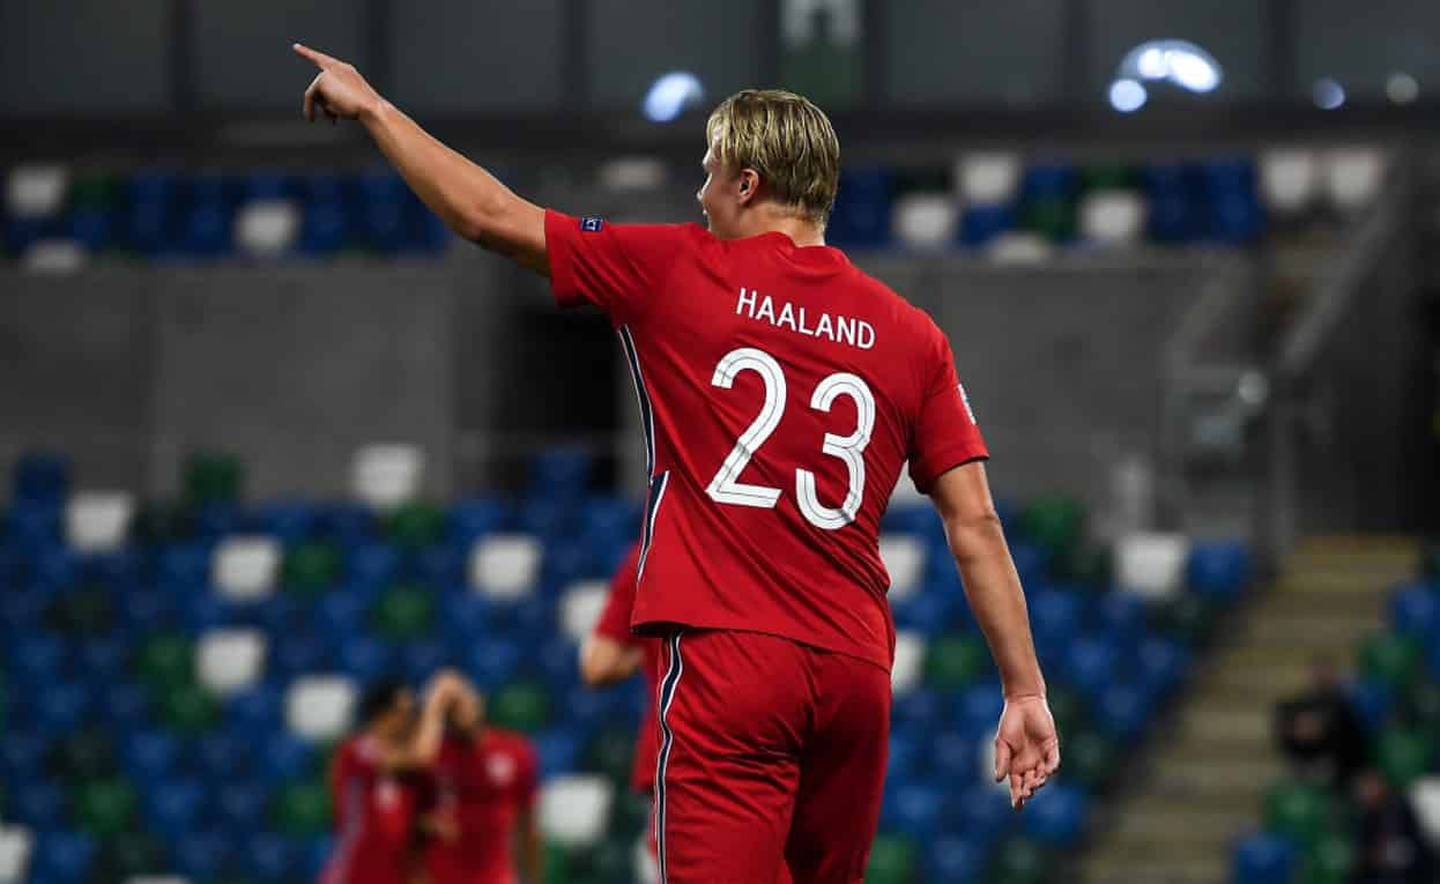 Northern Ireland , United Kingdom - 7 September 2020; Erling Braut Haaland of Norway during the UEFA Nations League B match between Northern Ireland and Norway at the National Football Stadium at Windsor Park in Belfast. (Photo By David Fitzgerald/Sportsfile via Getty Images)